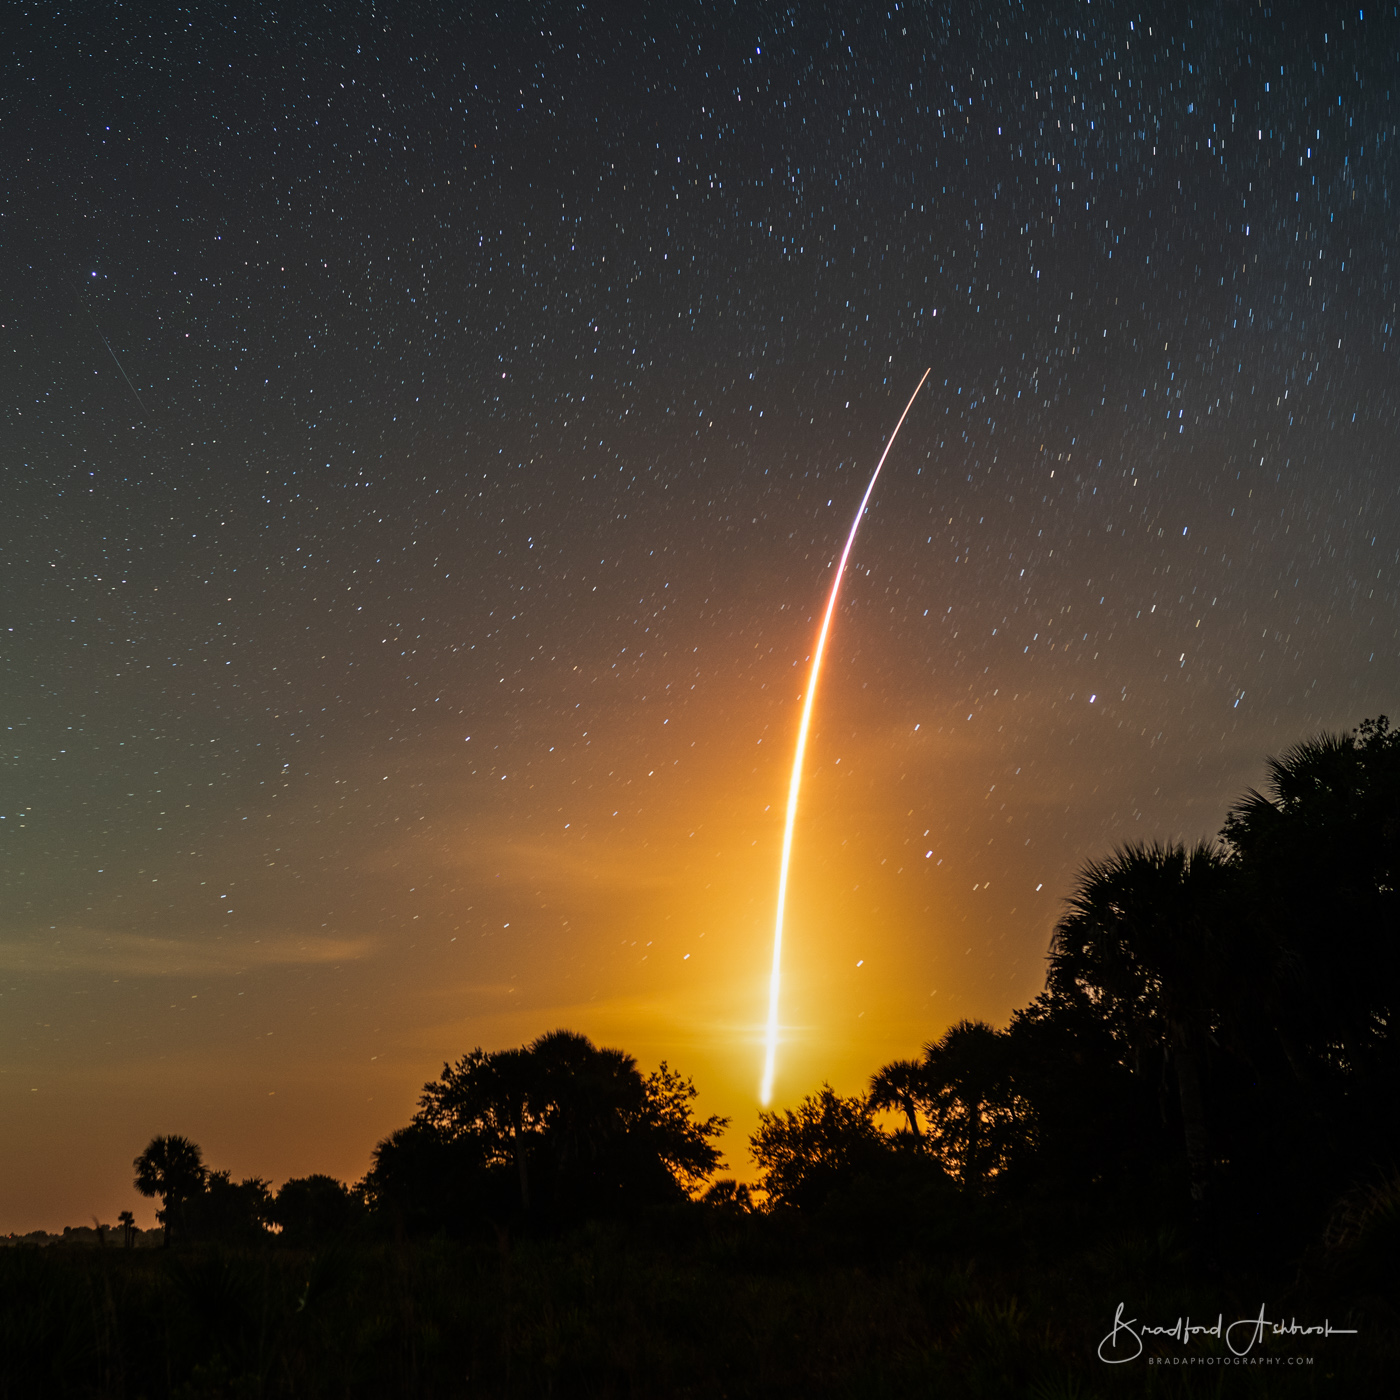 SpaceX Launch by Brad Ashbrook